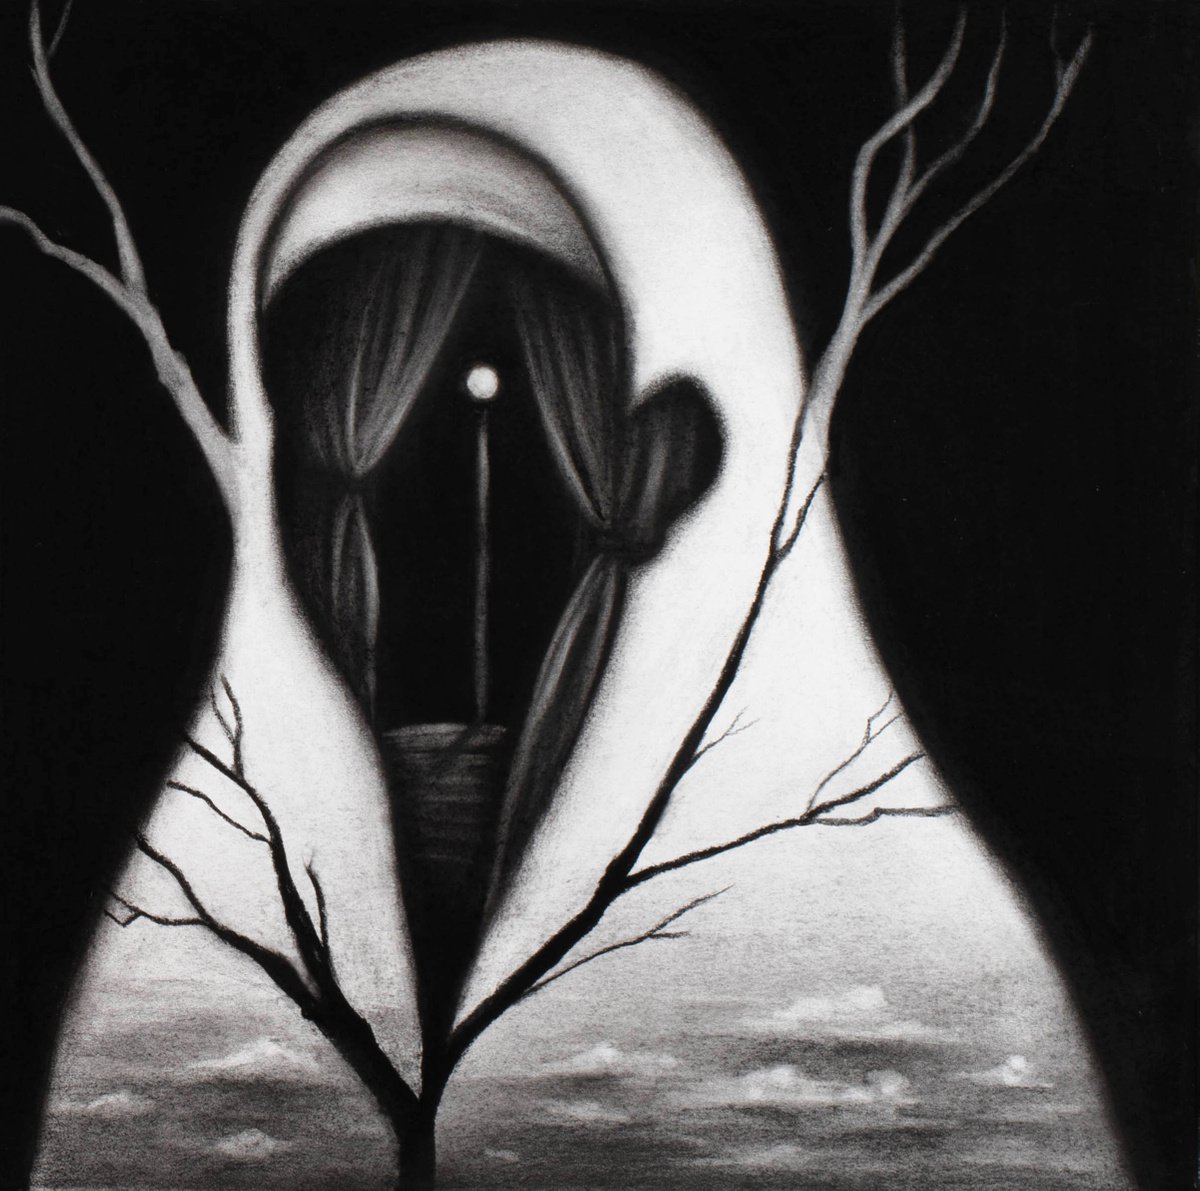  - The Two Mothers (Mater Tenebrarum) Diptych 1 of 2 by Alessio Radice